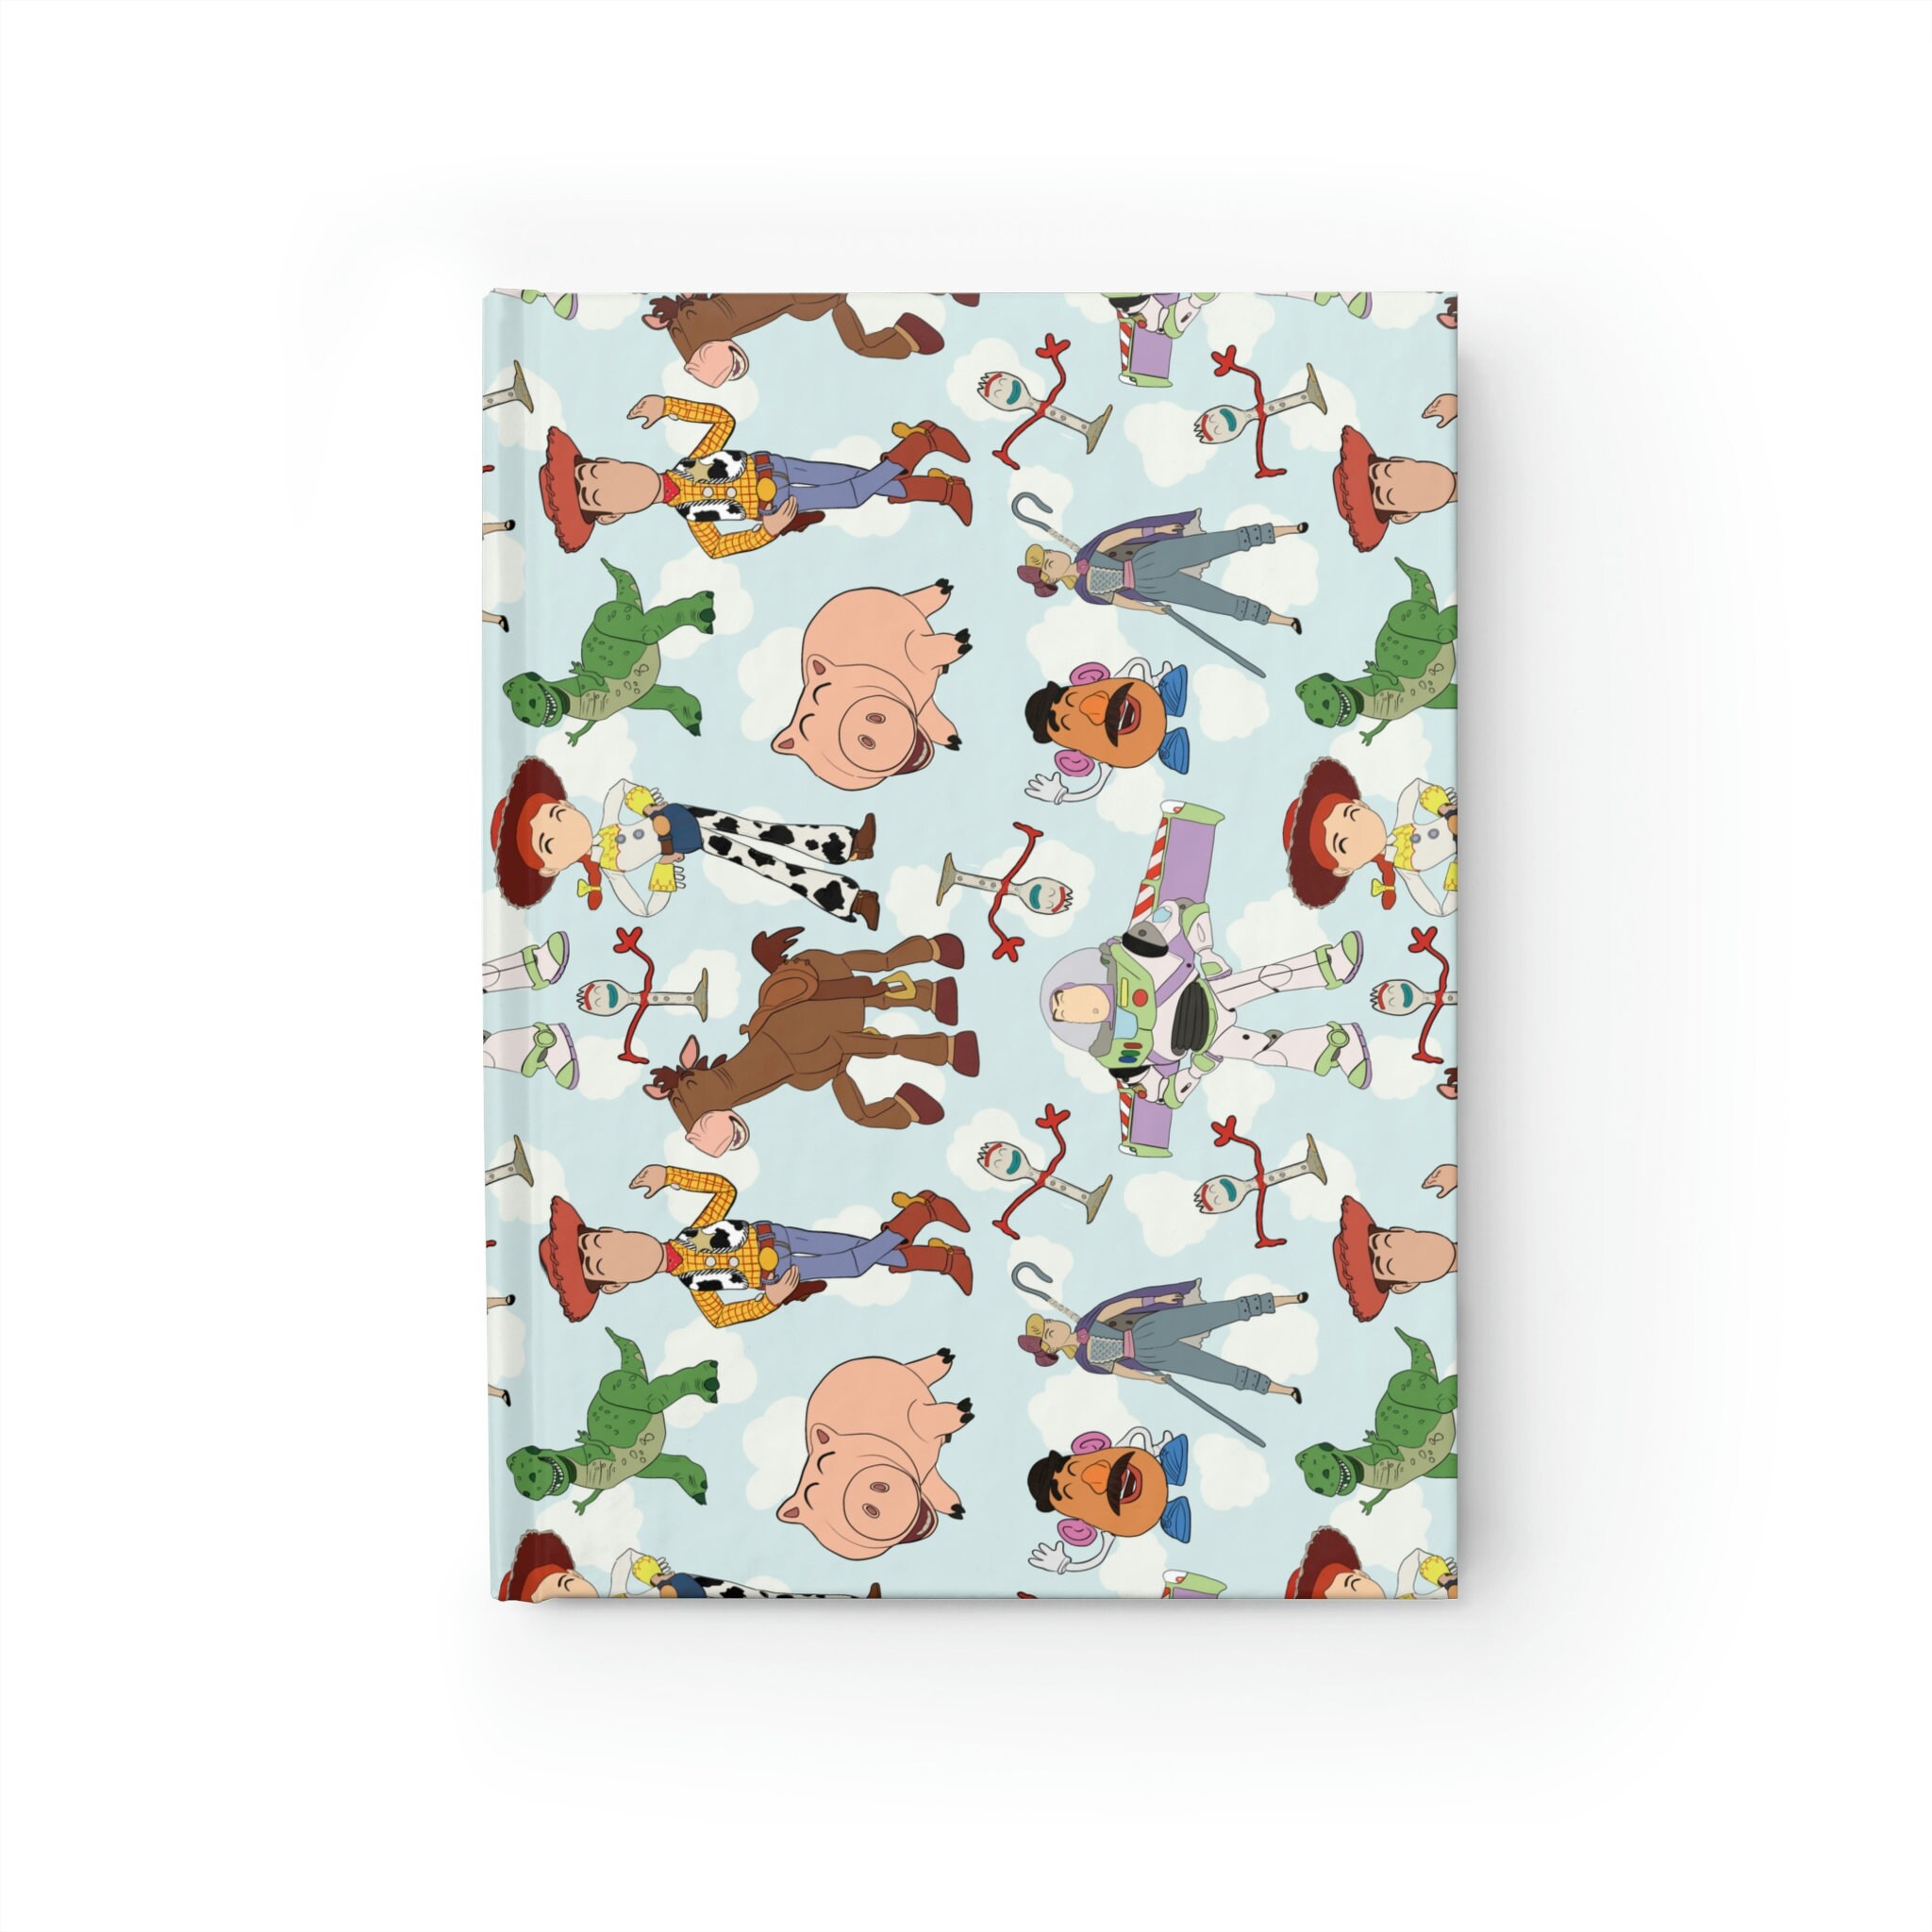 Toy Story Disney Hardcover Journal